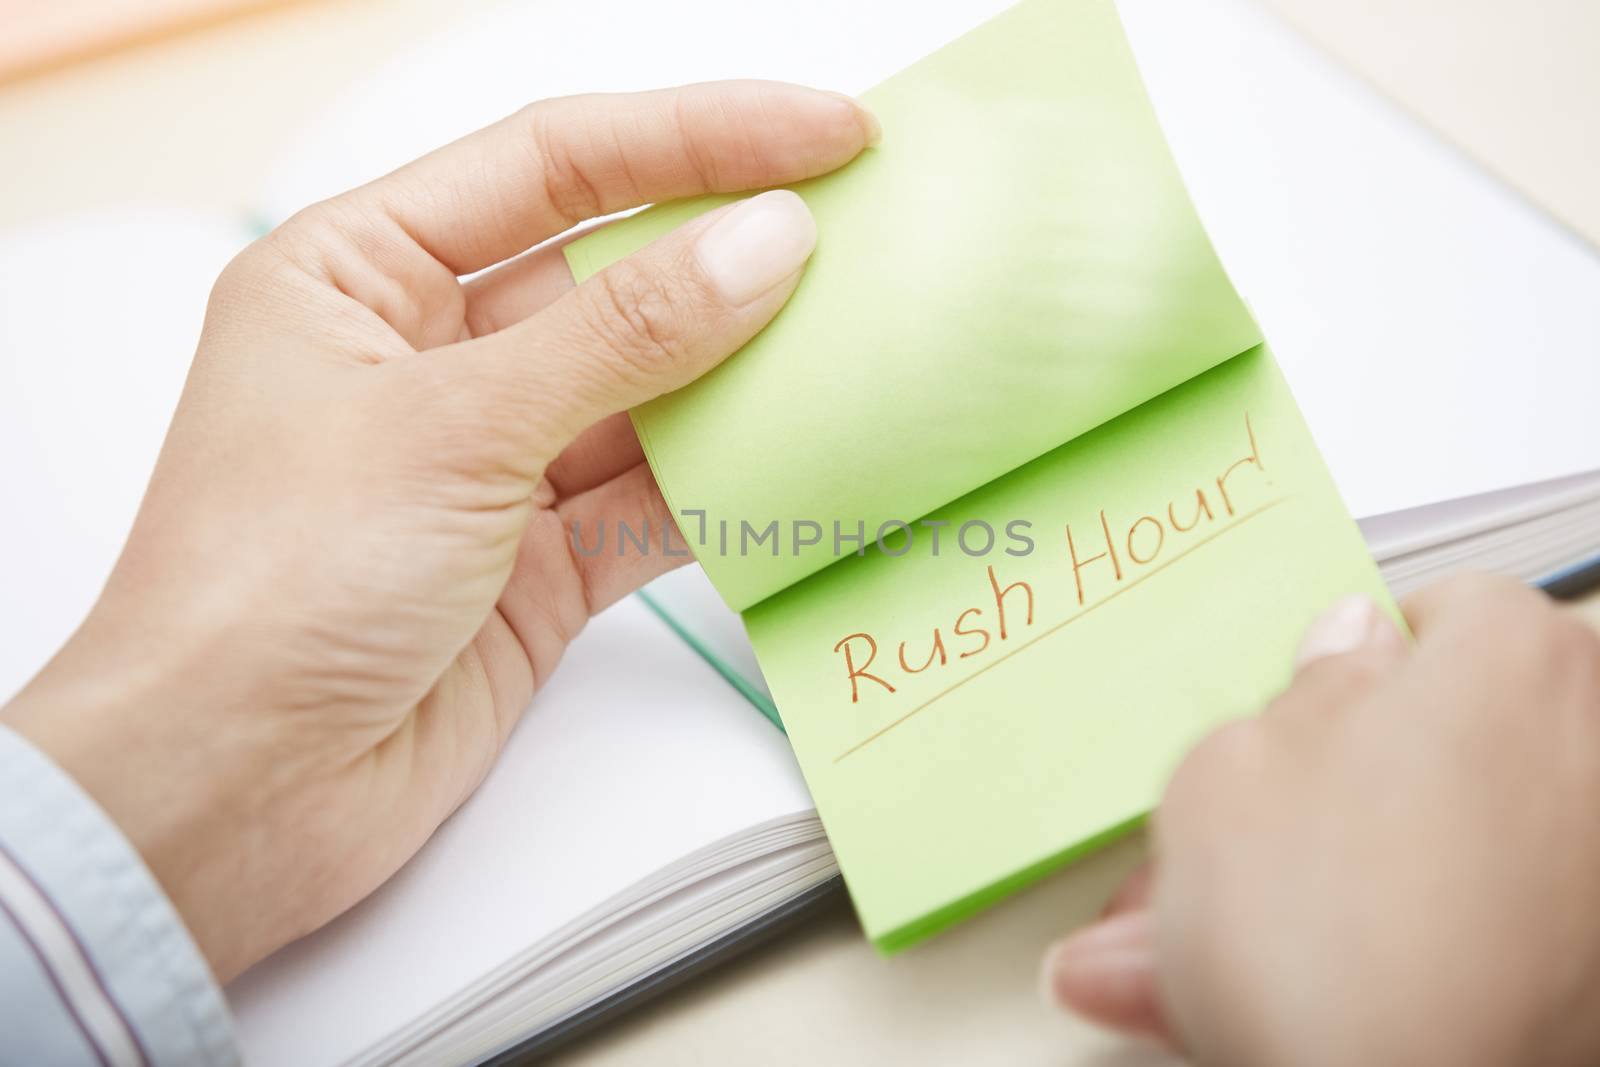 Rush hour text on adhesive note by Novic